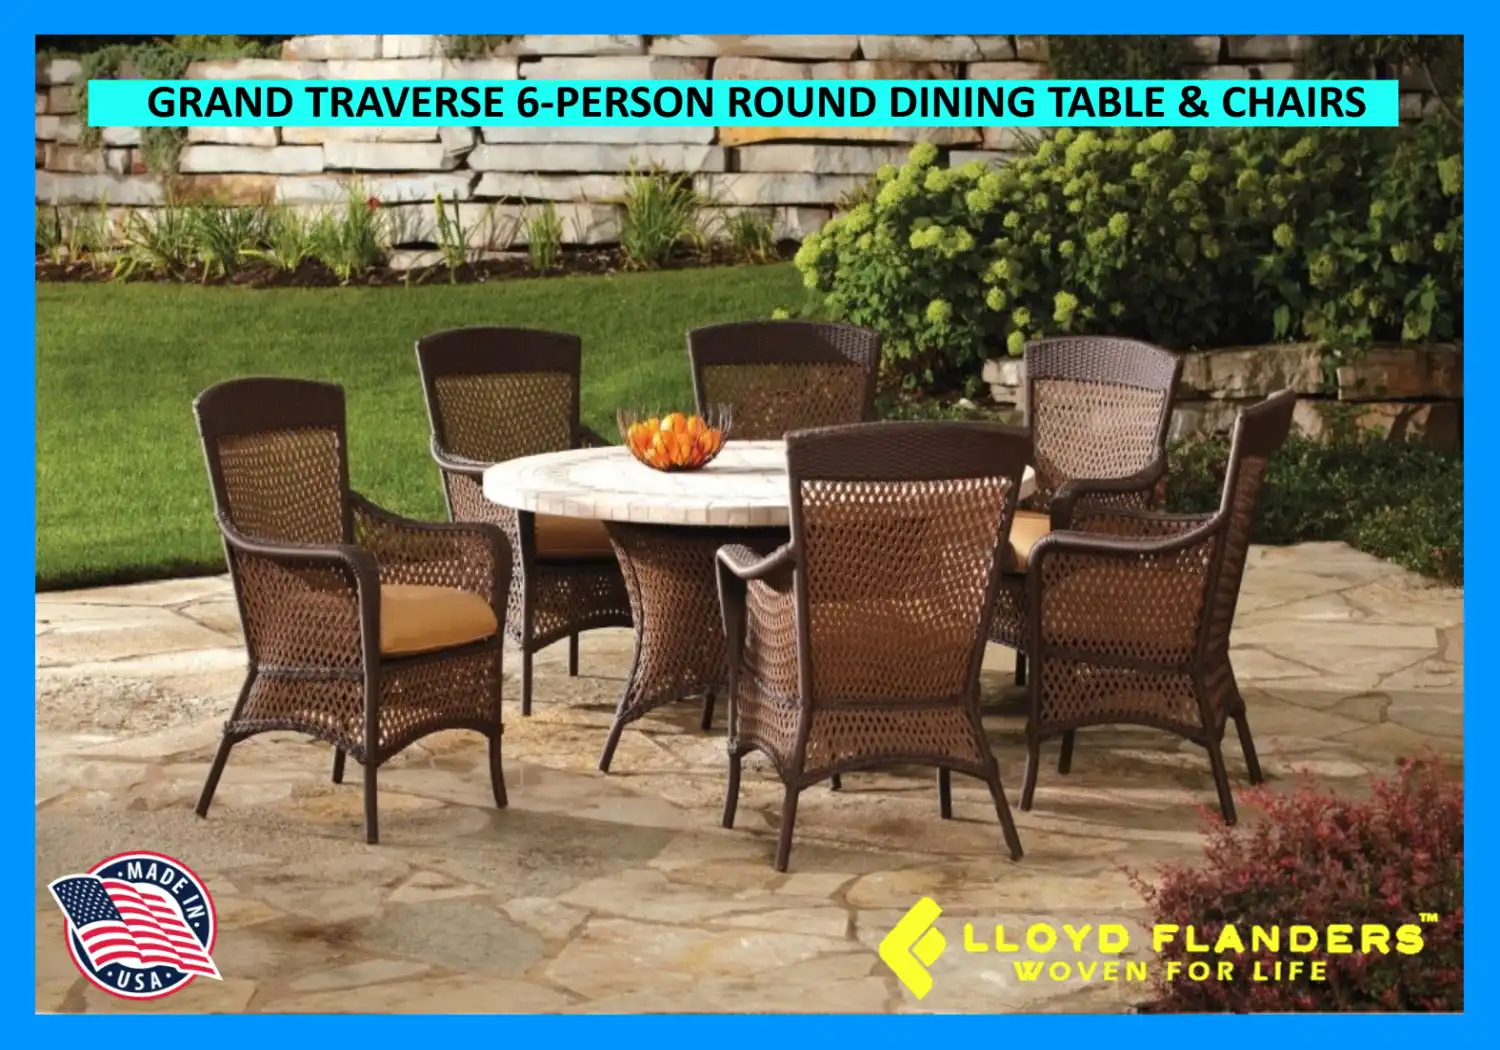 GRAND TRAVERSE 6-PERSON ROUND DINING TABLE & CHAIRS